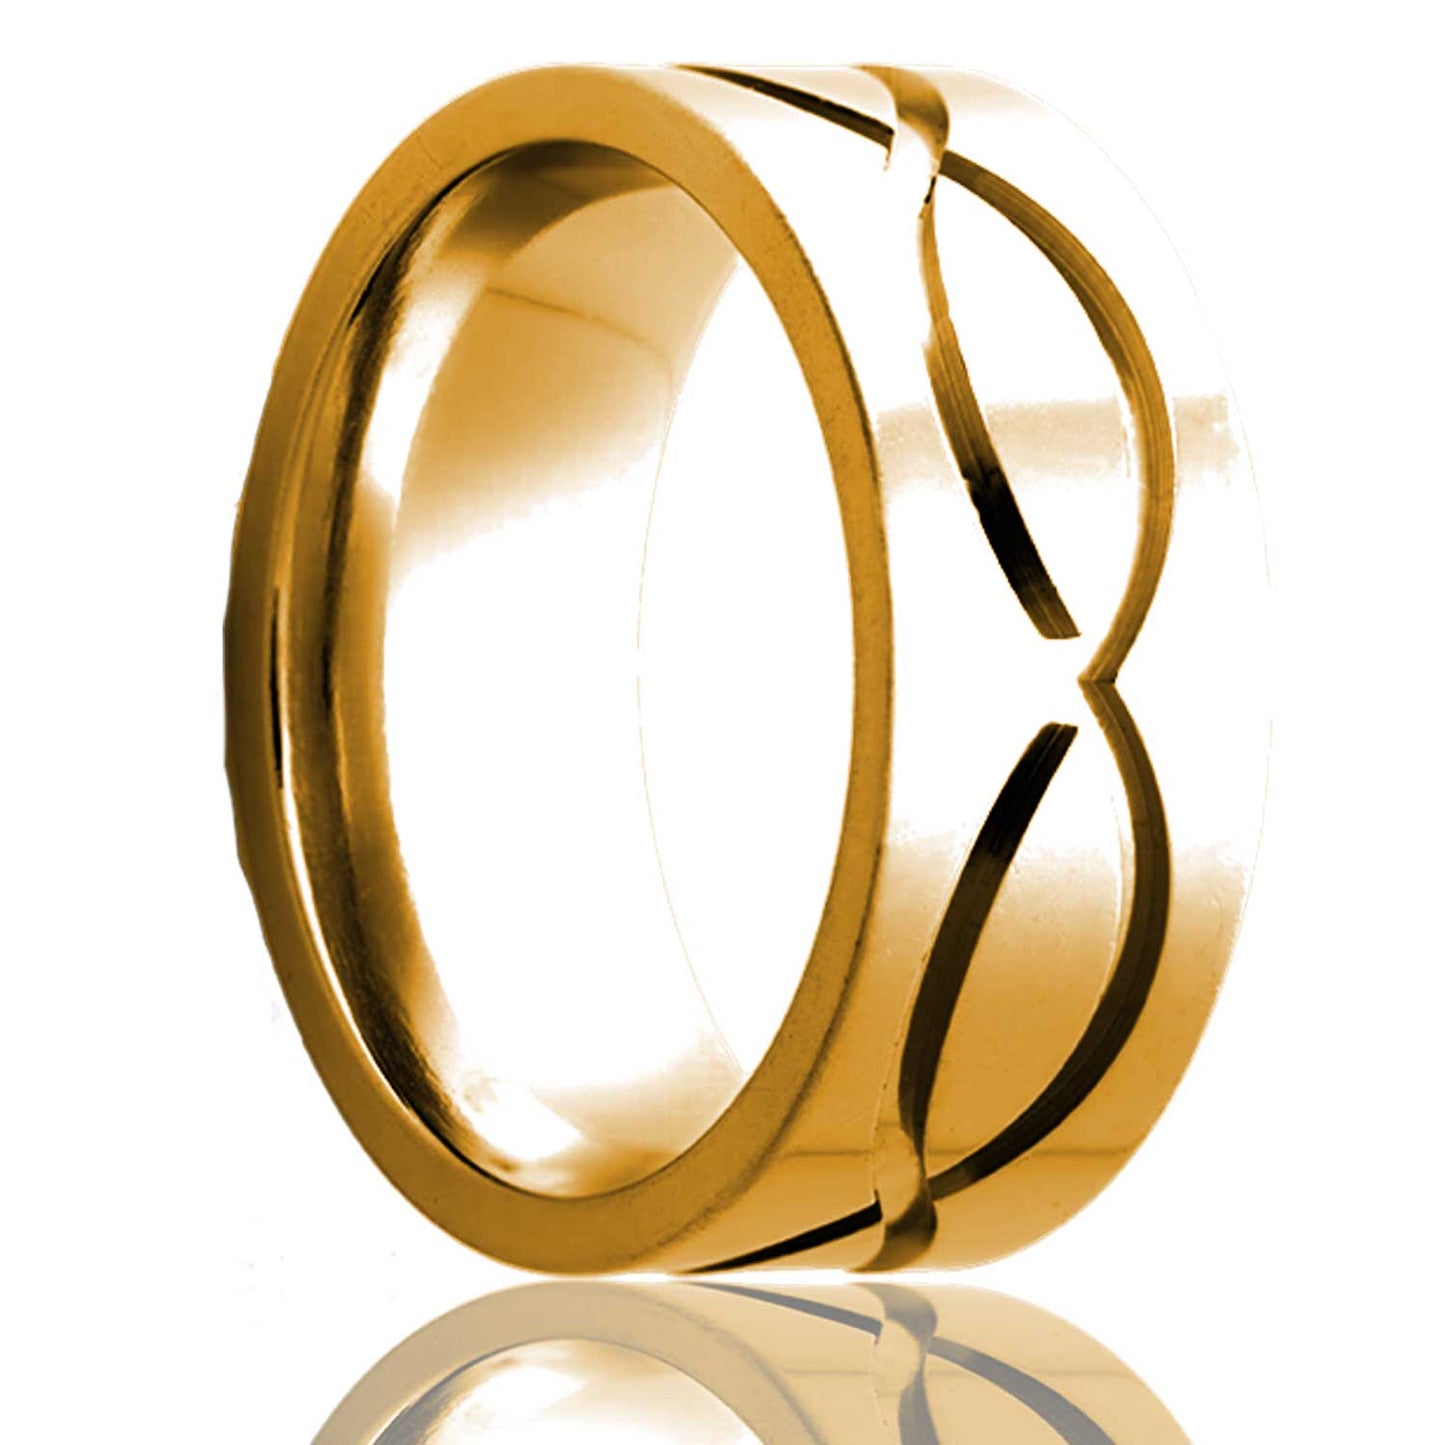 A 14k gold wedding band with infinity wave grooves displayed on a neutral white background.